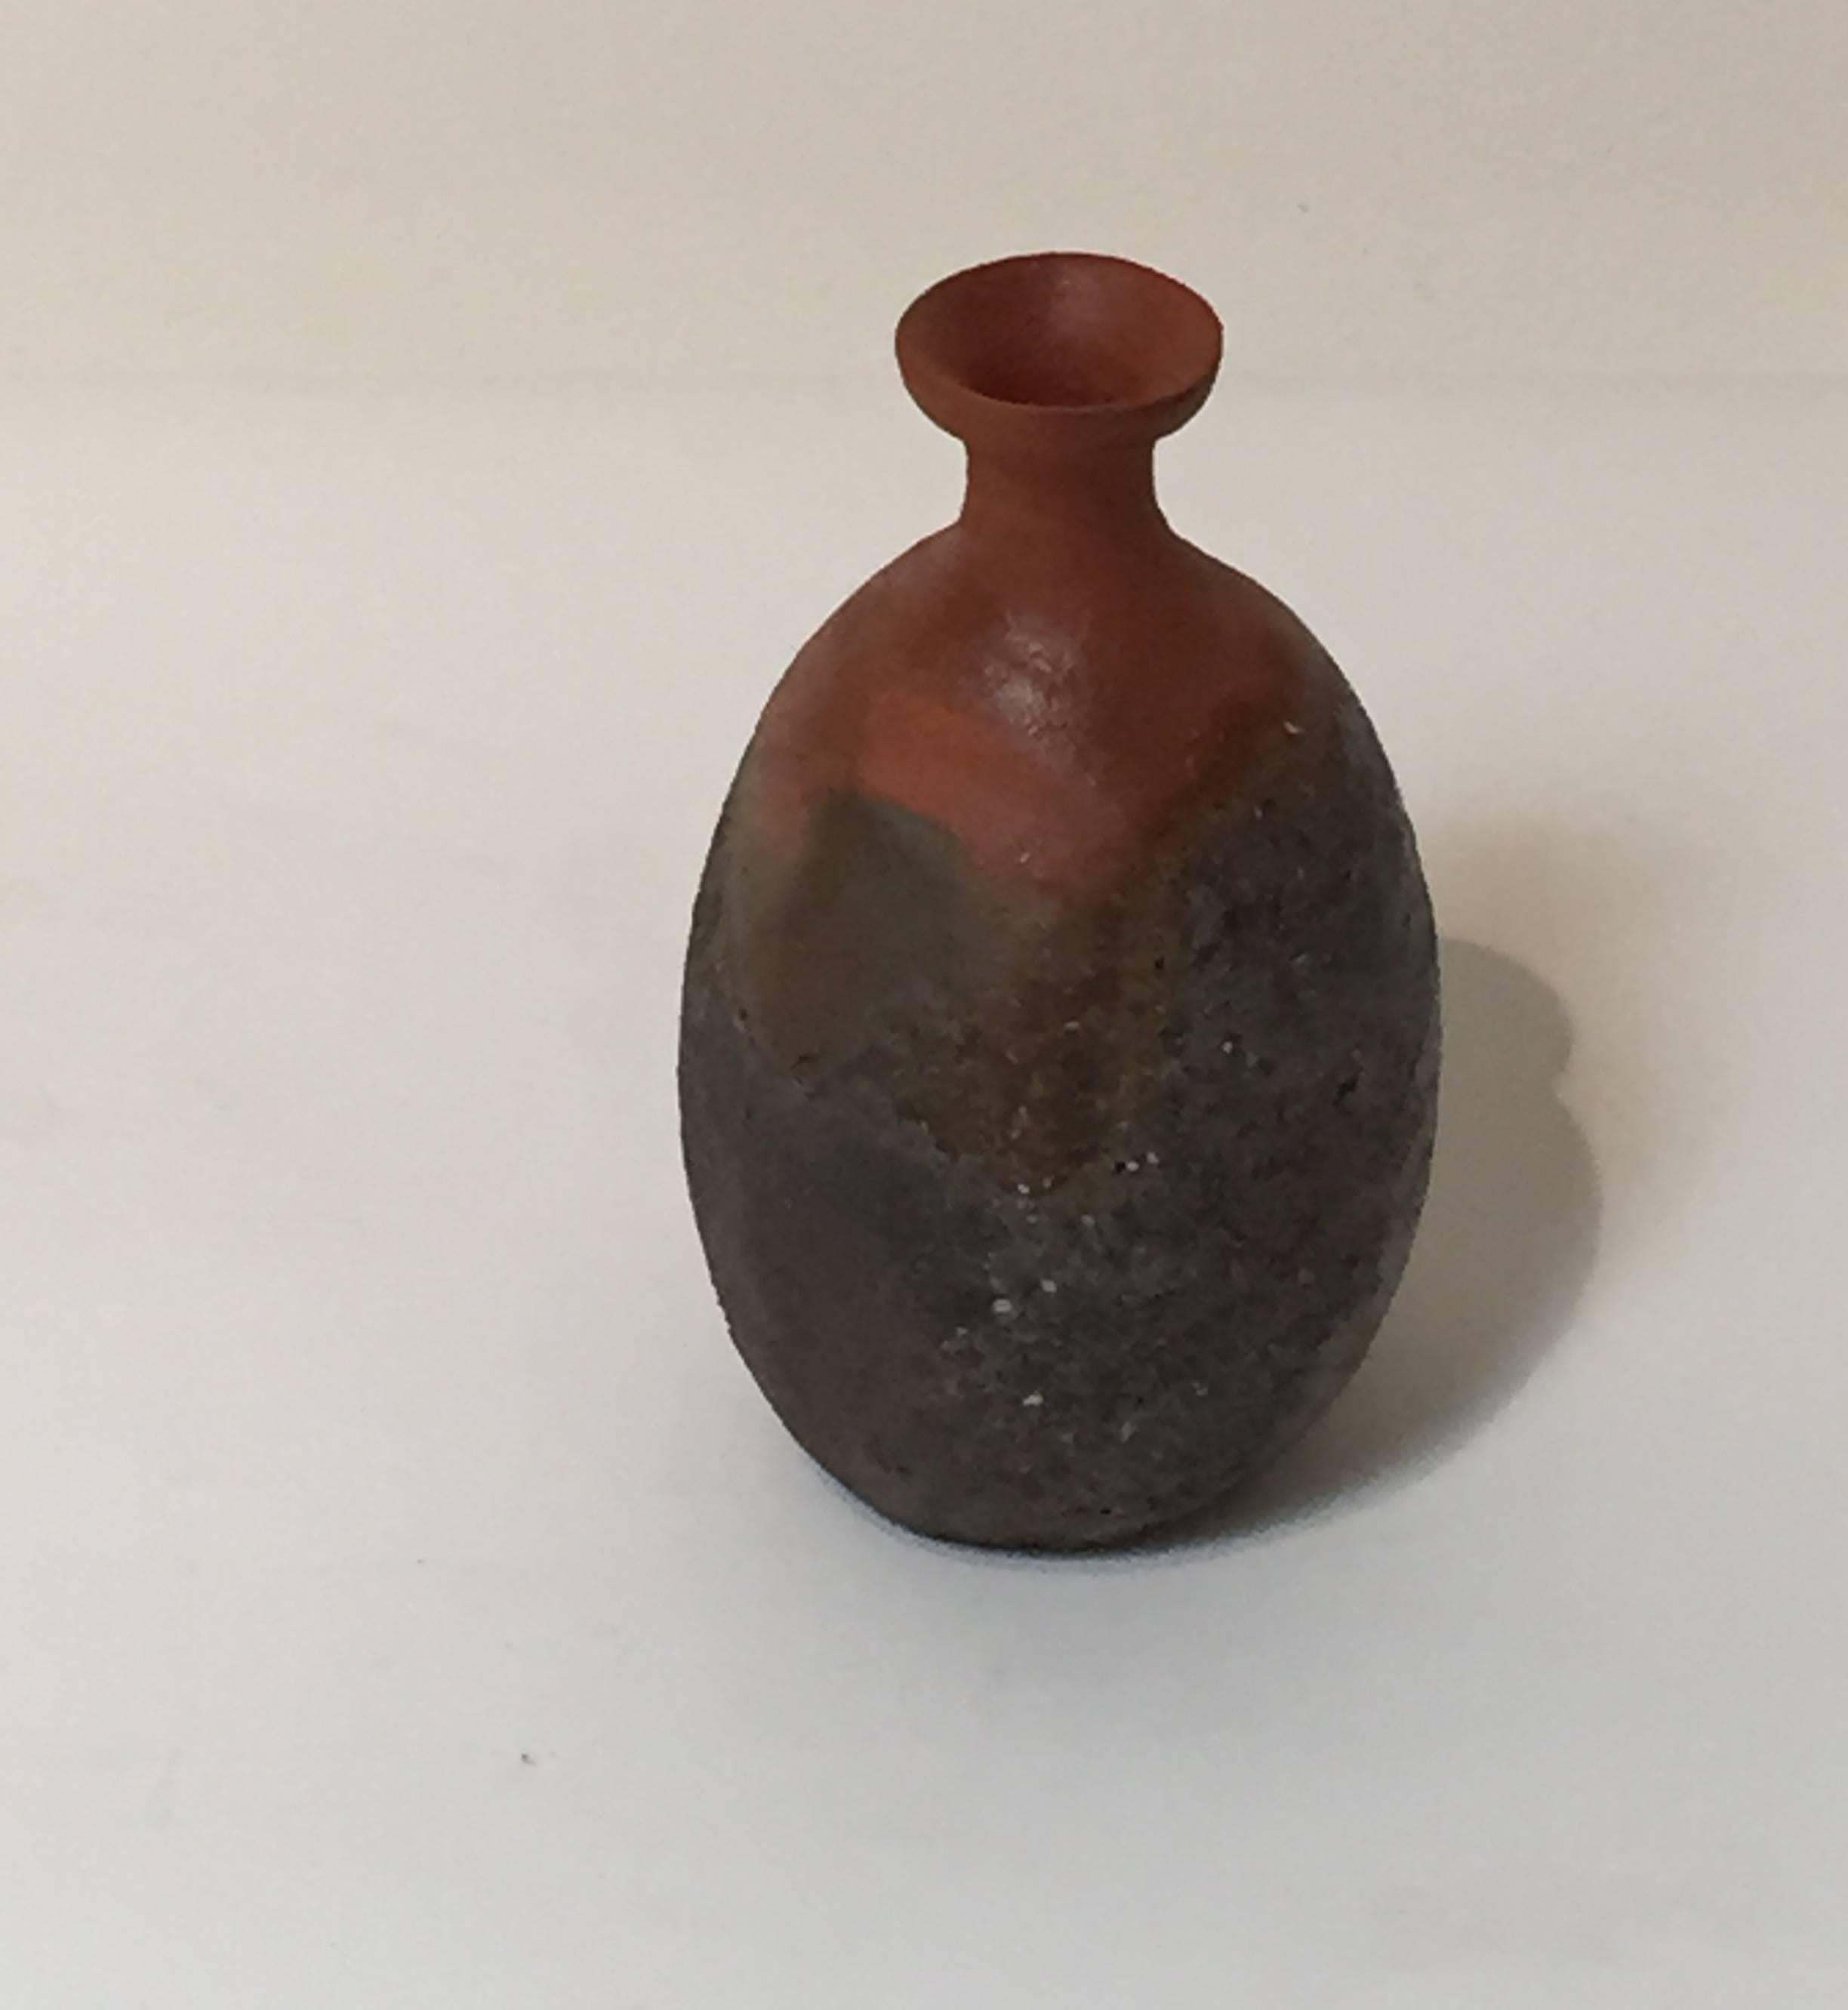 Wood fired sake flask by Japanese Potter Osawa Tsuneo (b.1962).
Natural ash glaze effects encompass the beautiful deep brown and red clay body.
Includes custom signed box.